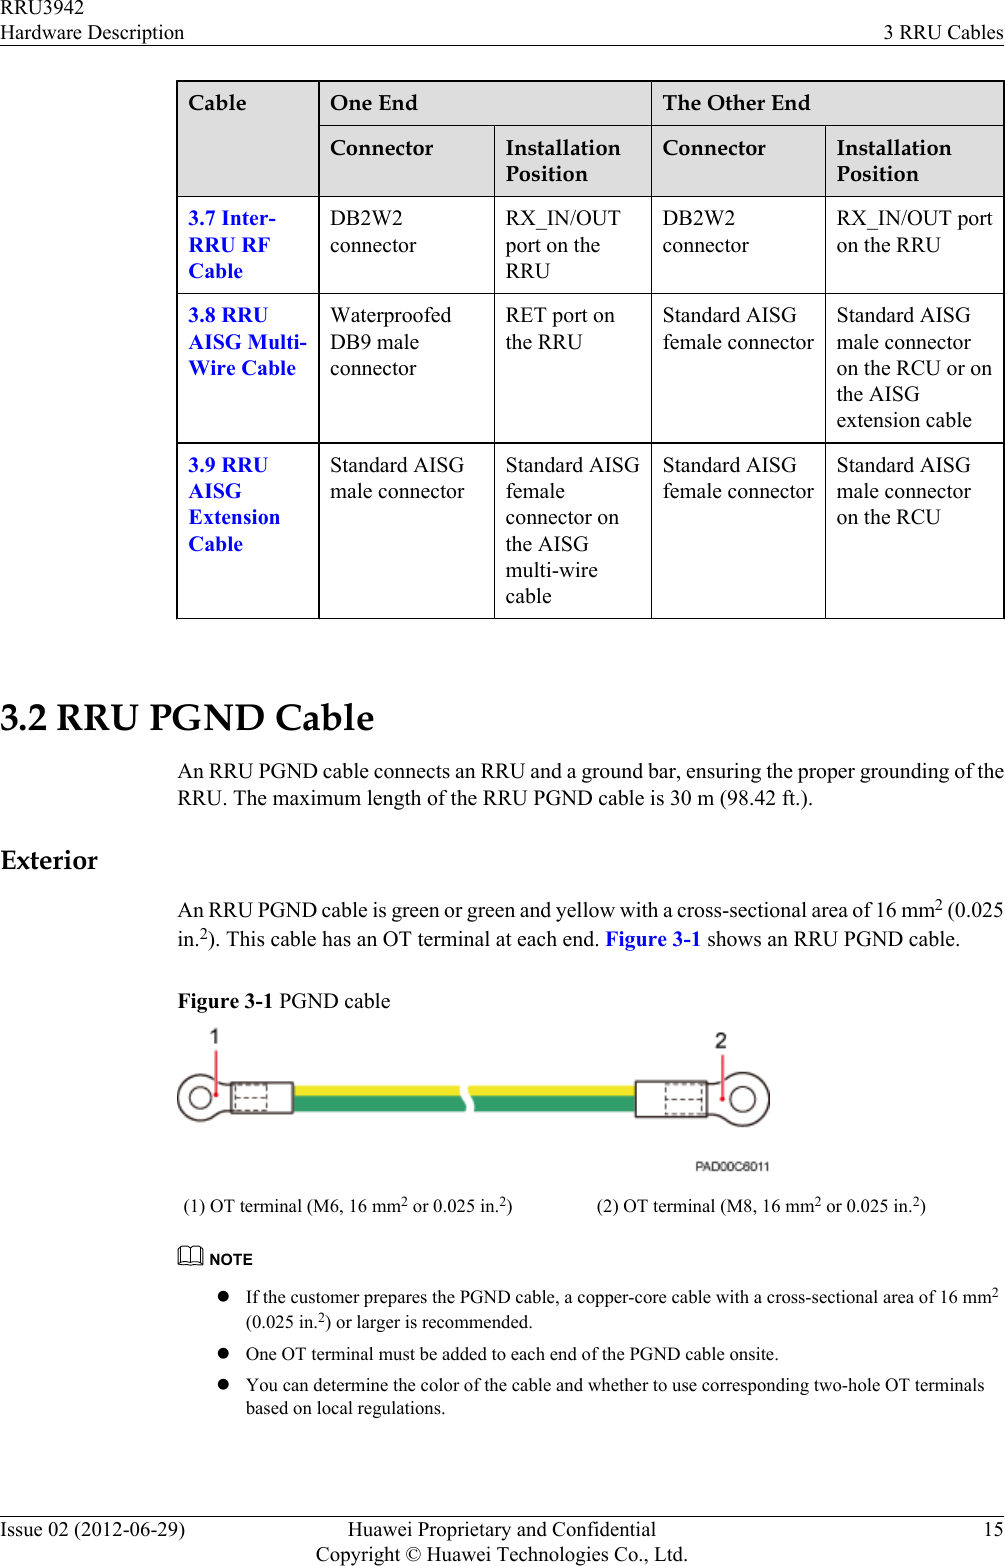 Cable One End The Other EndConnector InstallationPositionConnector InstallationPosition3.7 Inter-RRU RFCableDB2W2connectorRX_IN/OUTport on theRRUDB2W2connectorRX_IN/OUT porton the RRU3.8 RRUAISG Multi-Wire CableWaterproofedDB9 maleconnectorRET port onthe RRUStandard AISGfemale connectorStandard AISGmale connectoron the RCU or onthe AISGextension cable3.9 RRUAISGExtensionCableStandard AISGmale connectorStandard AISGfemaleconnector onthe AISGmulti-wirecableStandard AISGfemale connectorStandard AISGmale connectoron the RCU 3.2 RRU PGND CableAn RRU PGND cable connects an RRU and a ground bar, ensuring the proper grounding of theRRU. The maximum length of the RRU PGND cable is 30 m (98.42 ft.).ExteriorAn RRU PGND cable is green or green and yellow with a cross-sectional area of 16 mm2 (0.025in.2). This cable has an OT terminal at each end. Figure 3-1 shows an RRU PGND cable.Figure 3-1 PGND cable(1) OT terminal (M6, 16 mm2 or 0.025 in.2) (2) OT terminal (M8, 16 mm2 or 0.025 in.2)NOTElIf the customer prepares the PGND cable, a copper-core cable with a cross-sectional area of 16 mm2(0.025 in.2) or larger is recommended.lOne OT terminal must be added to each end of the PGND cable onsite.lYou can determine the color of the cable and whether to use corresponding two-hole OT terminalsbased on local regulations. RRU3942Hardware Description 3 RRU CablesIssue 02 (2012-06-29) Huawei Proprietary and ConfidentialCopyright © Huawei Technologies Co., Ltd.15